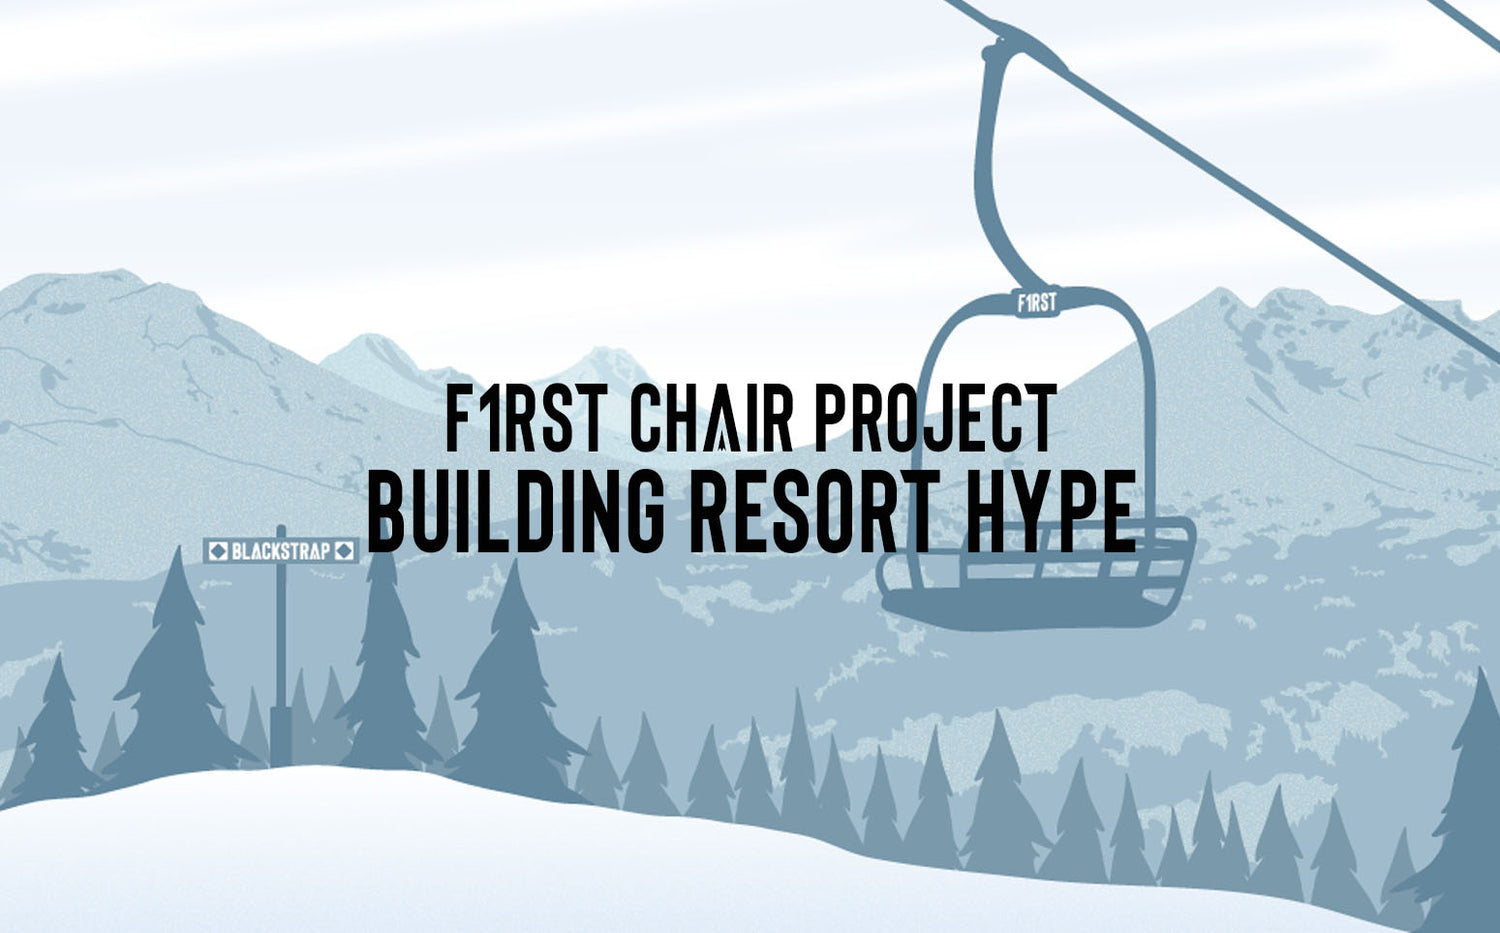 F1rst Chair Project: Building Resort Hype Across The Nation